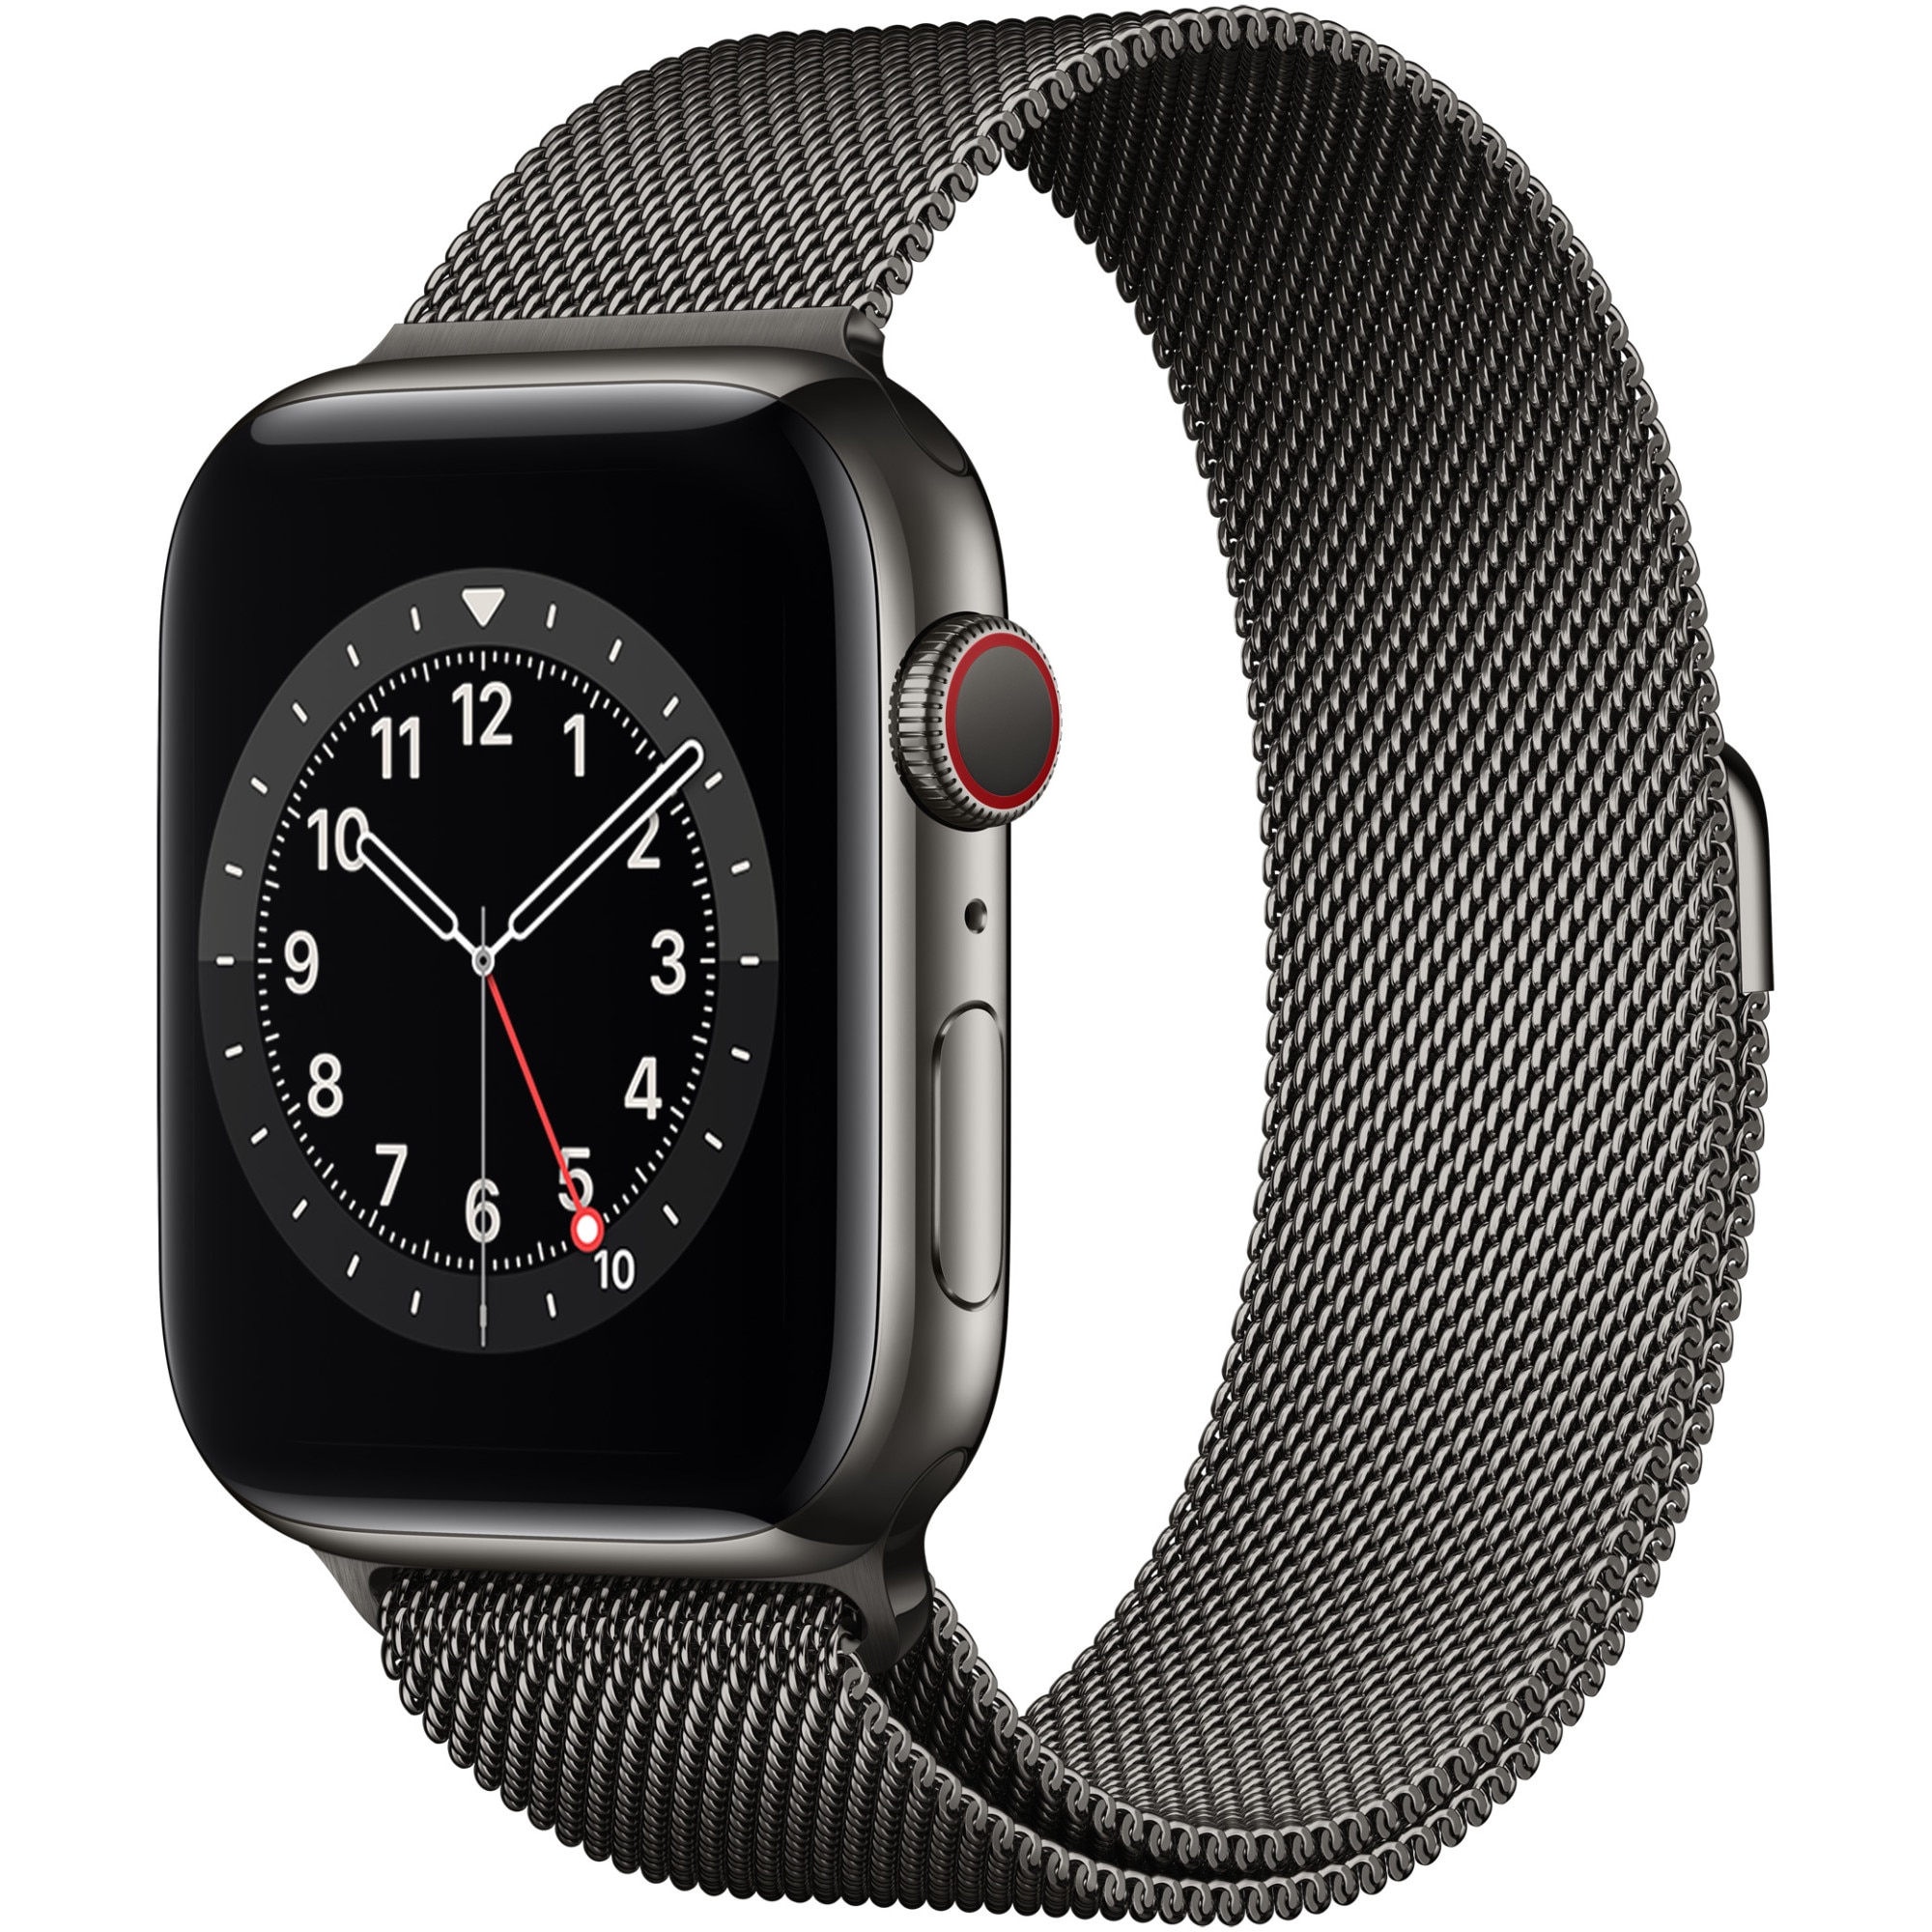 Apple Watch 6, GPS, Cellular, Carcasa Graphite Stainless Steel 44mm